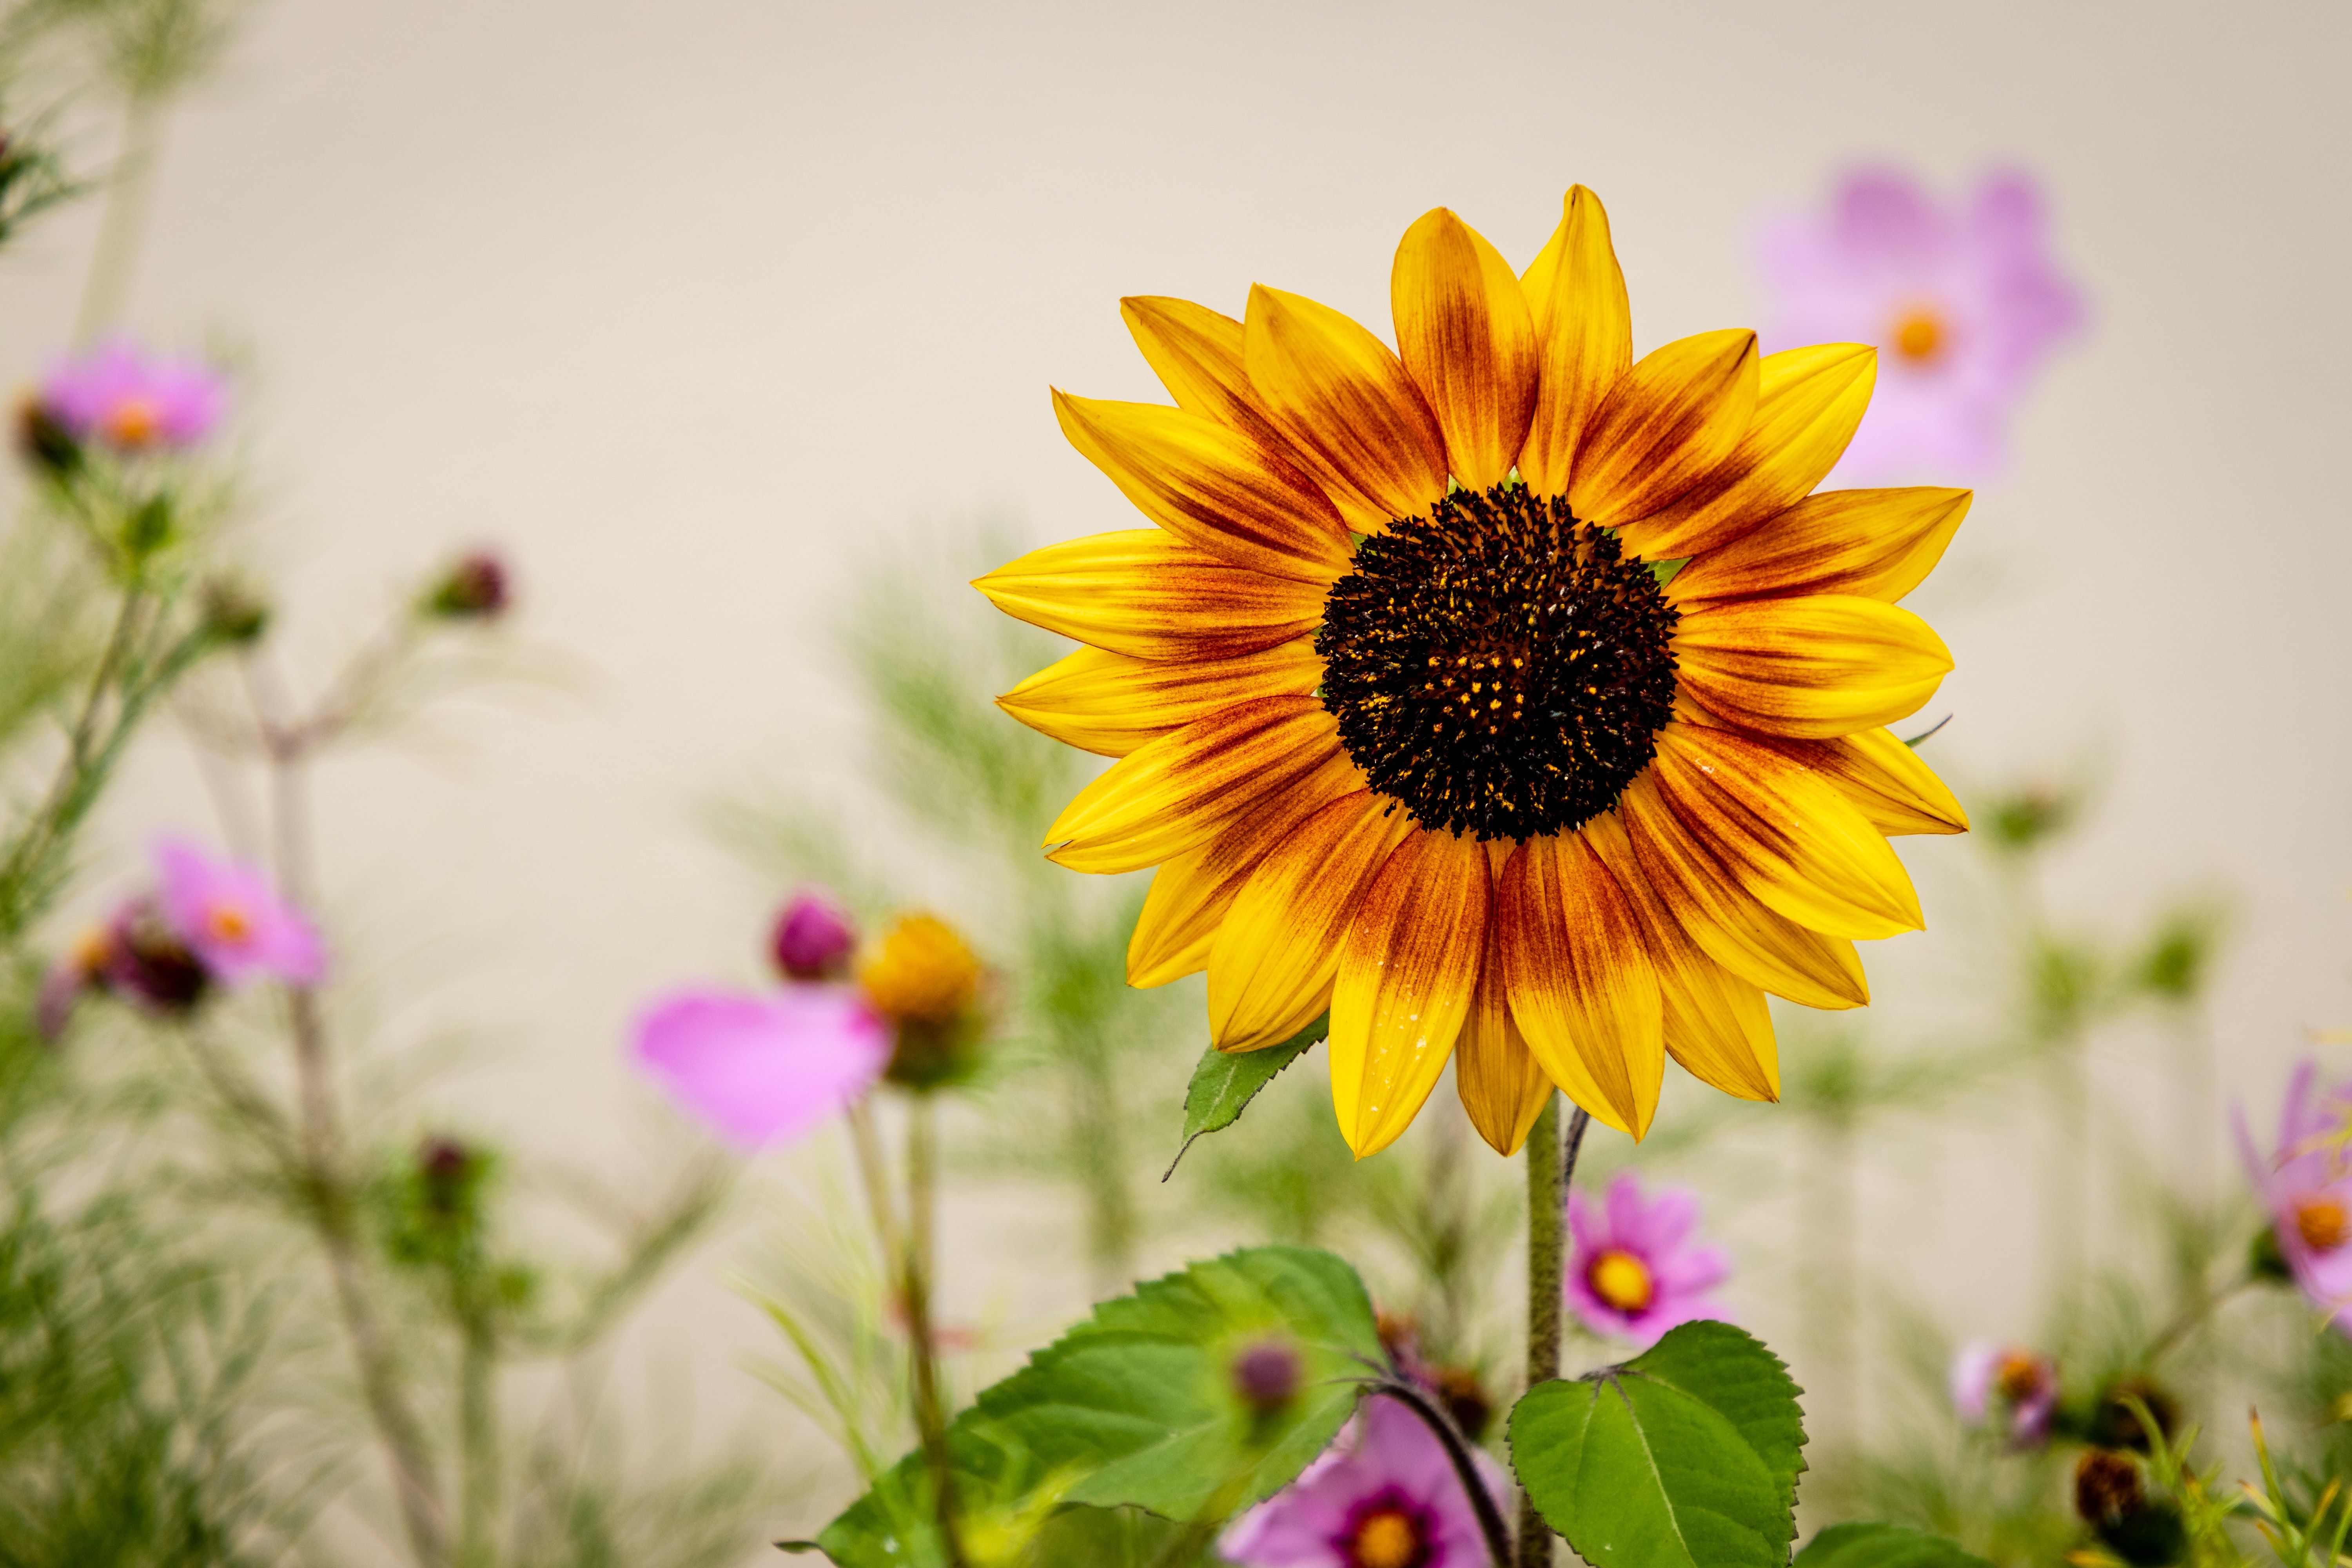 A bright yellow sunflower with a brown center stands out against a backdrop of purple flowers. - Sunflower